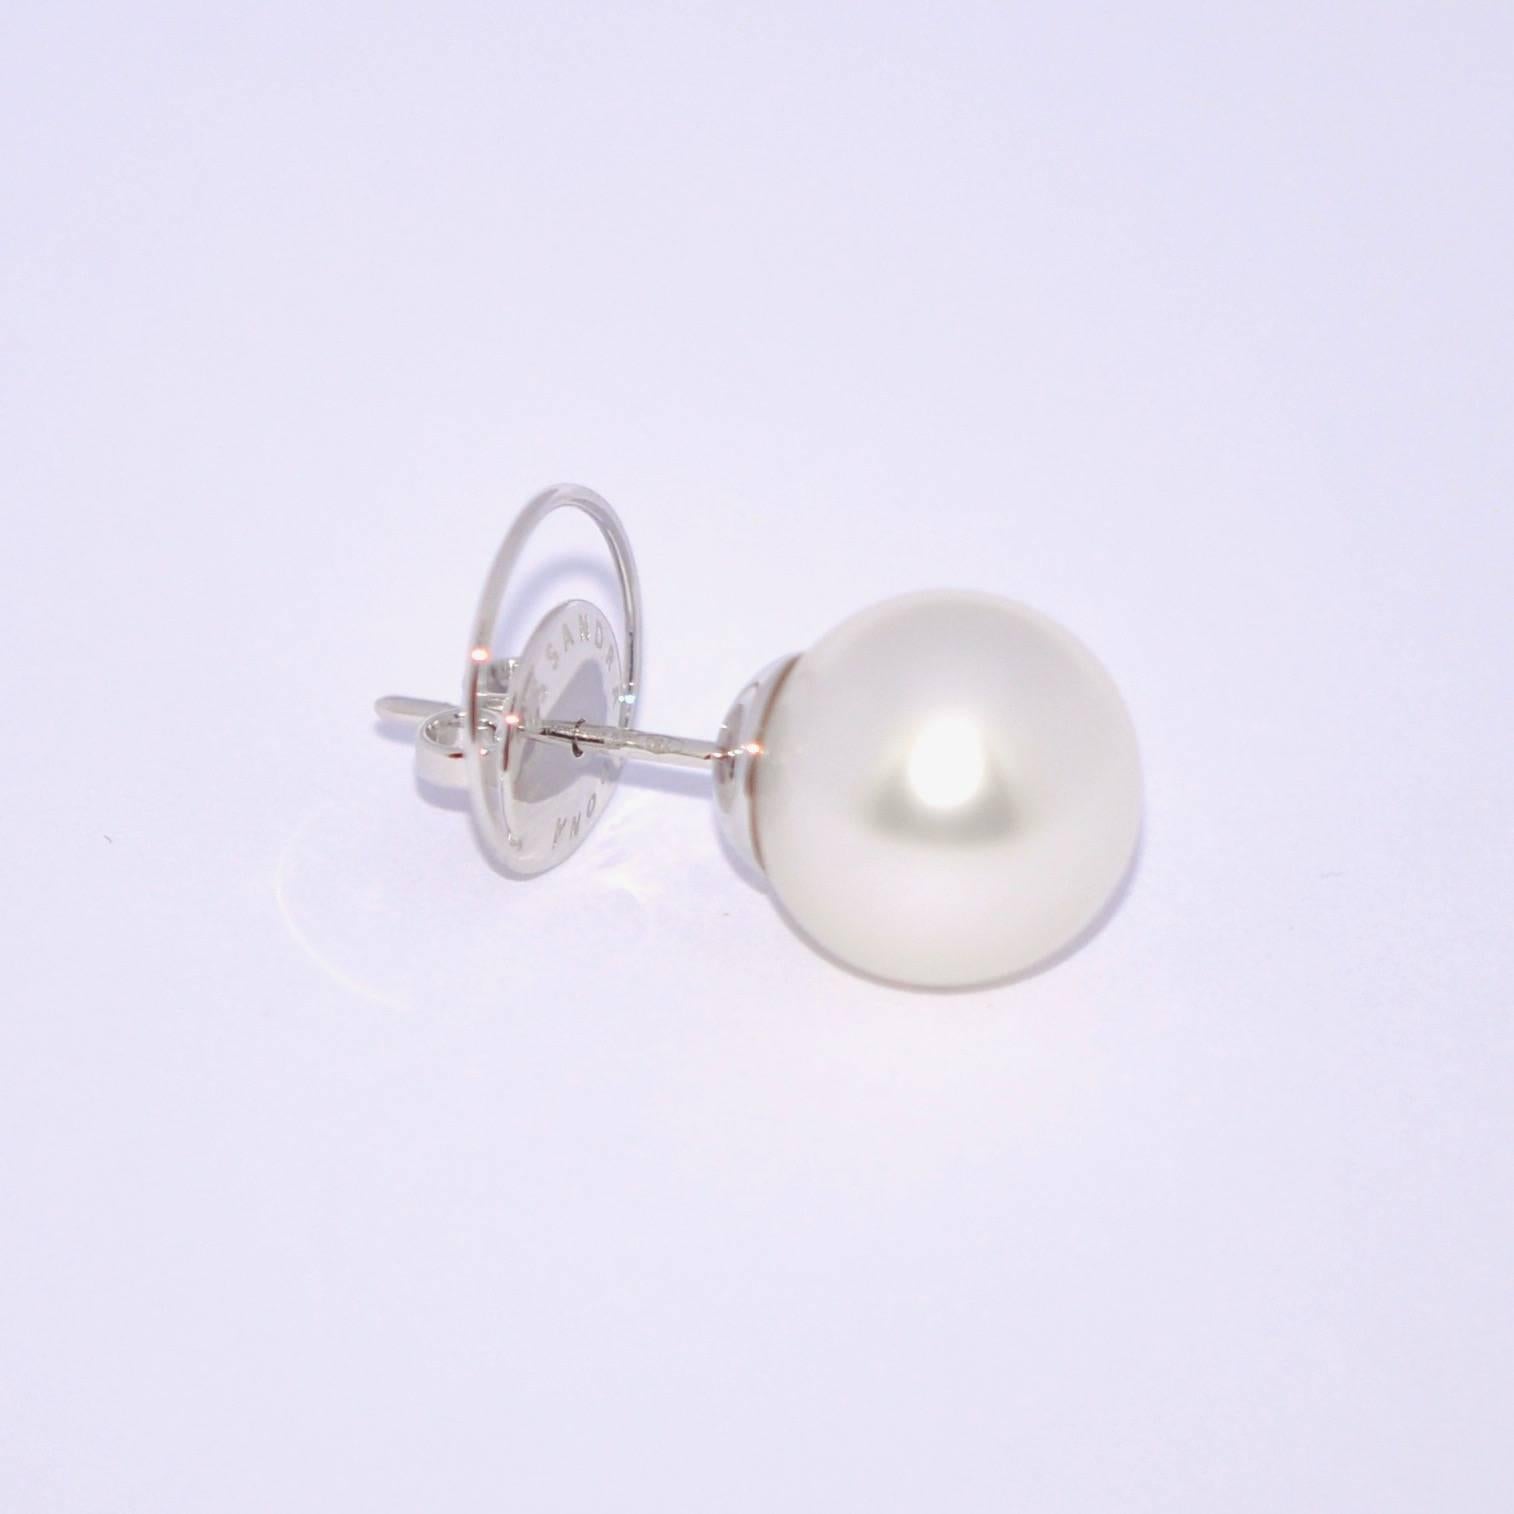 Discover this White South Sea Pearl 11-12 mm 18K Whitw Gold Earrings.
South Sea pearls require no artificial treatments or colouring before being put onto the market. By virtue of such prestige and beauty they are considered “the Queens of pearls